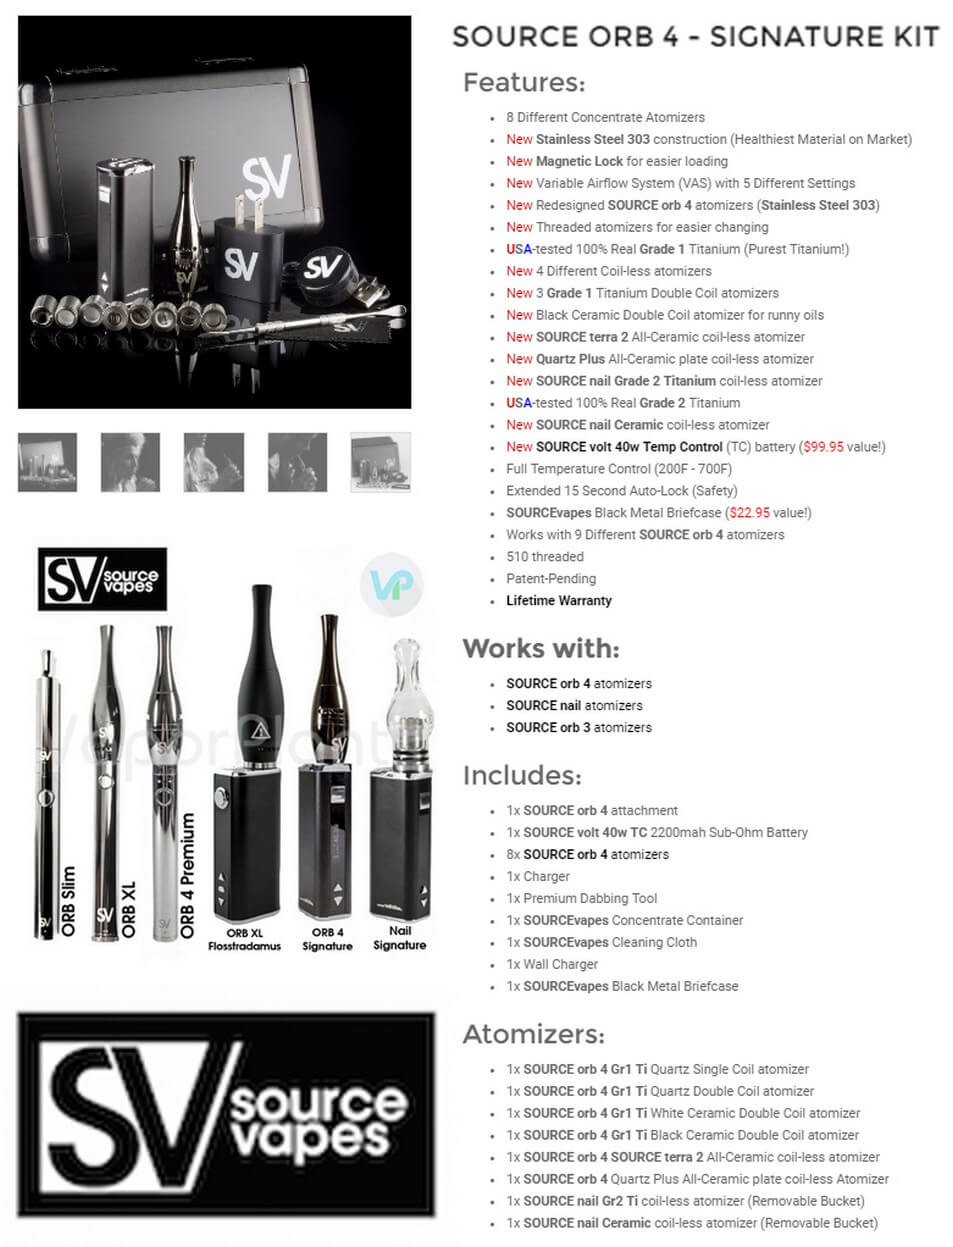 Source ORB 4 Signature Vape for Wax Information